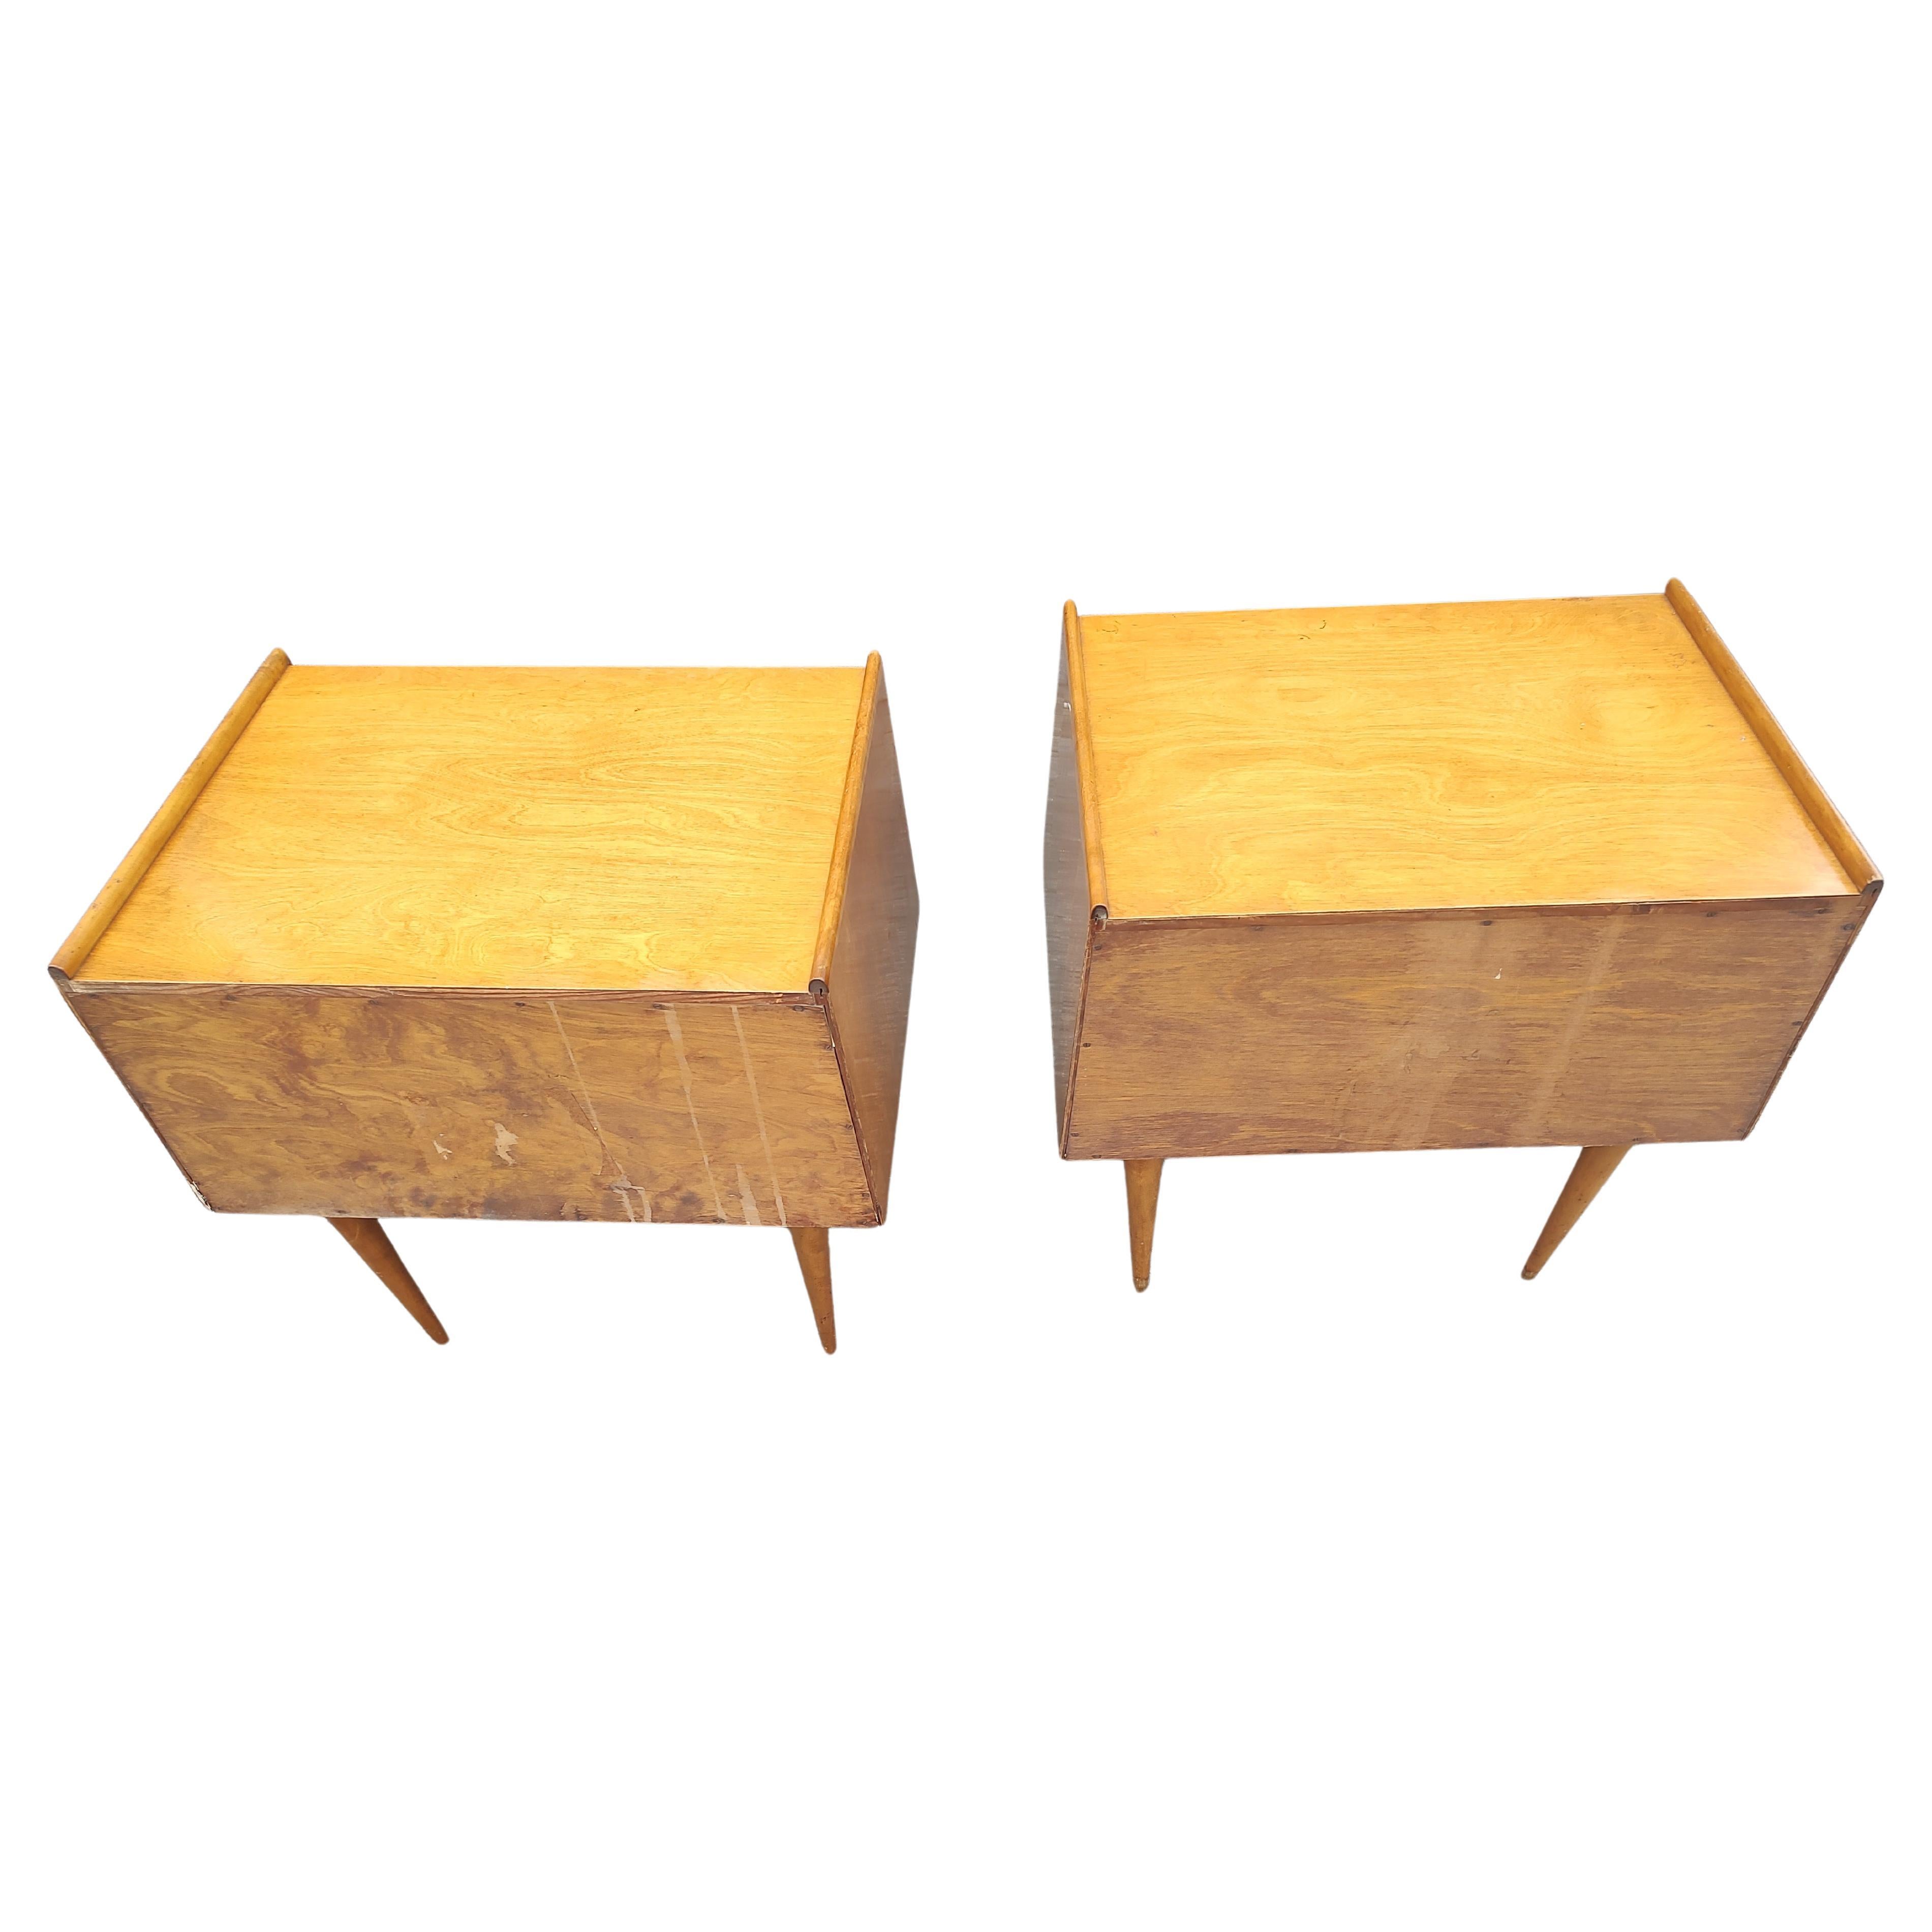 Hand-Crafted Pair of Mid Century Modern Night Stands in Birch by Edmond Spence Sweden C1953 For Sale